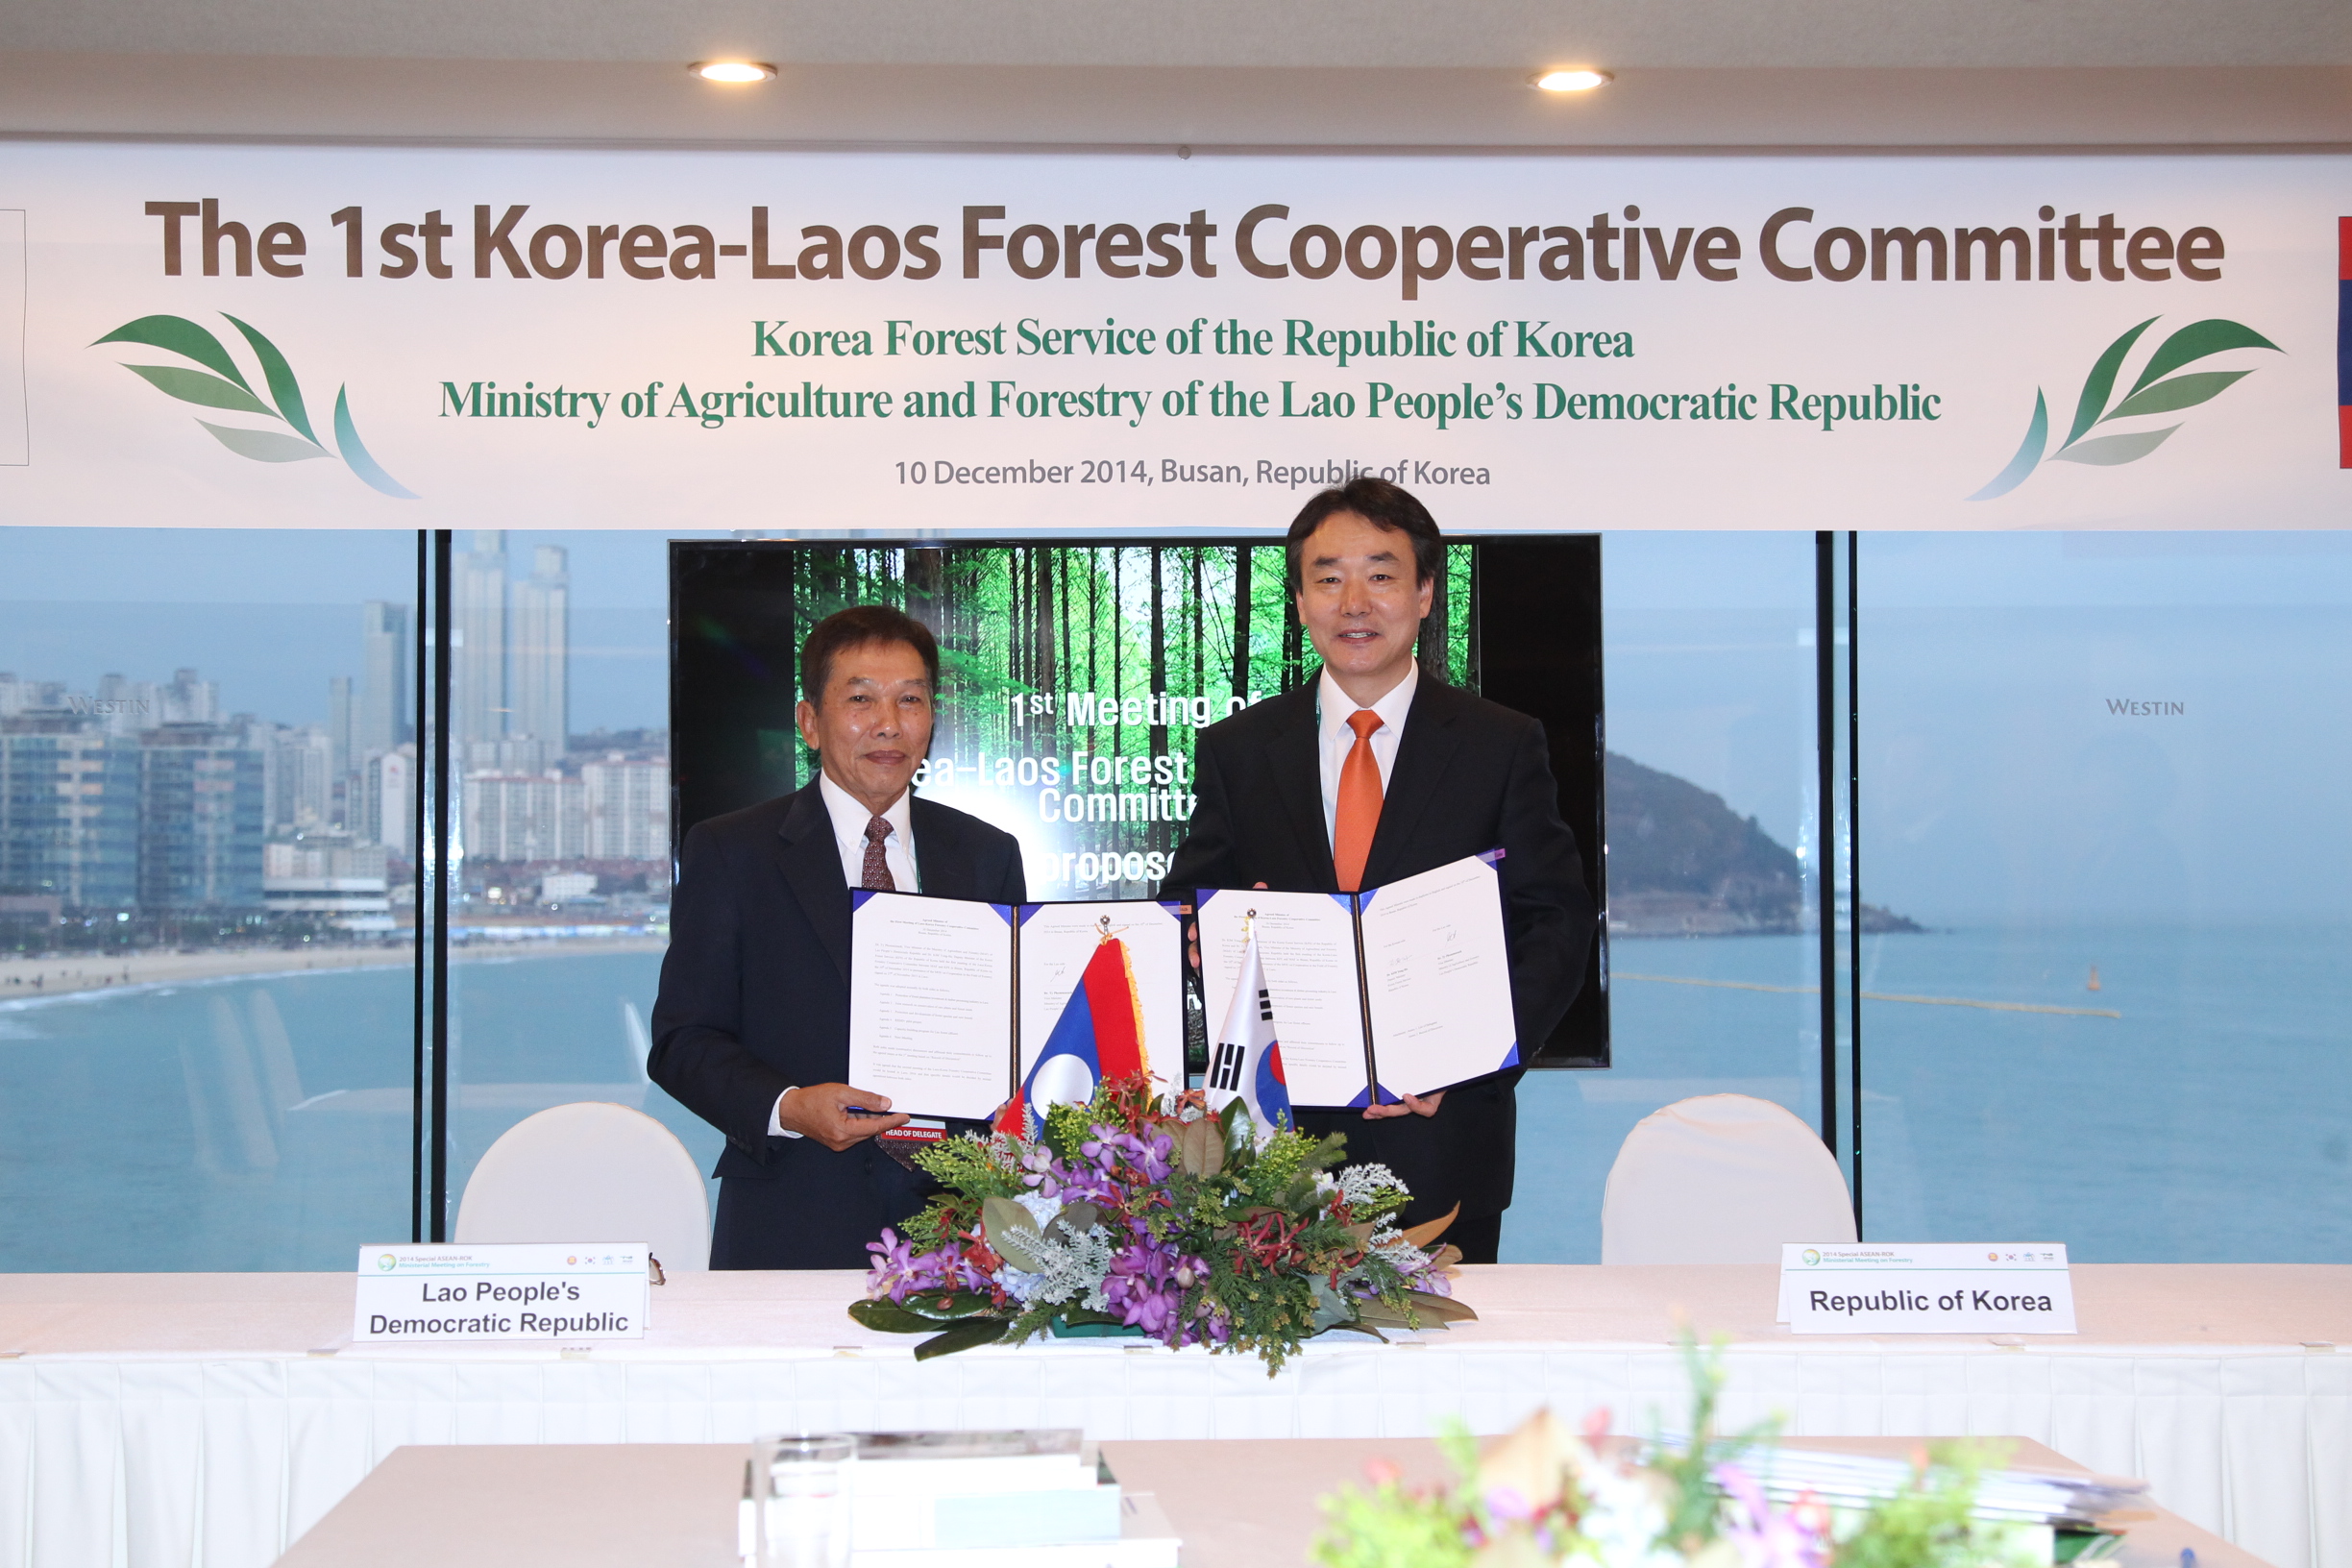 First Korea-Laos Forest Cooperative Committee 이미지1